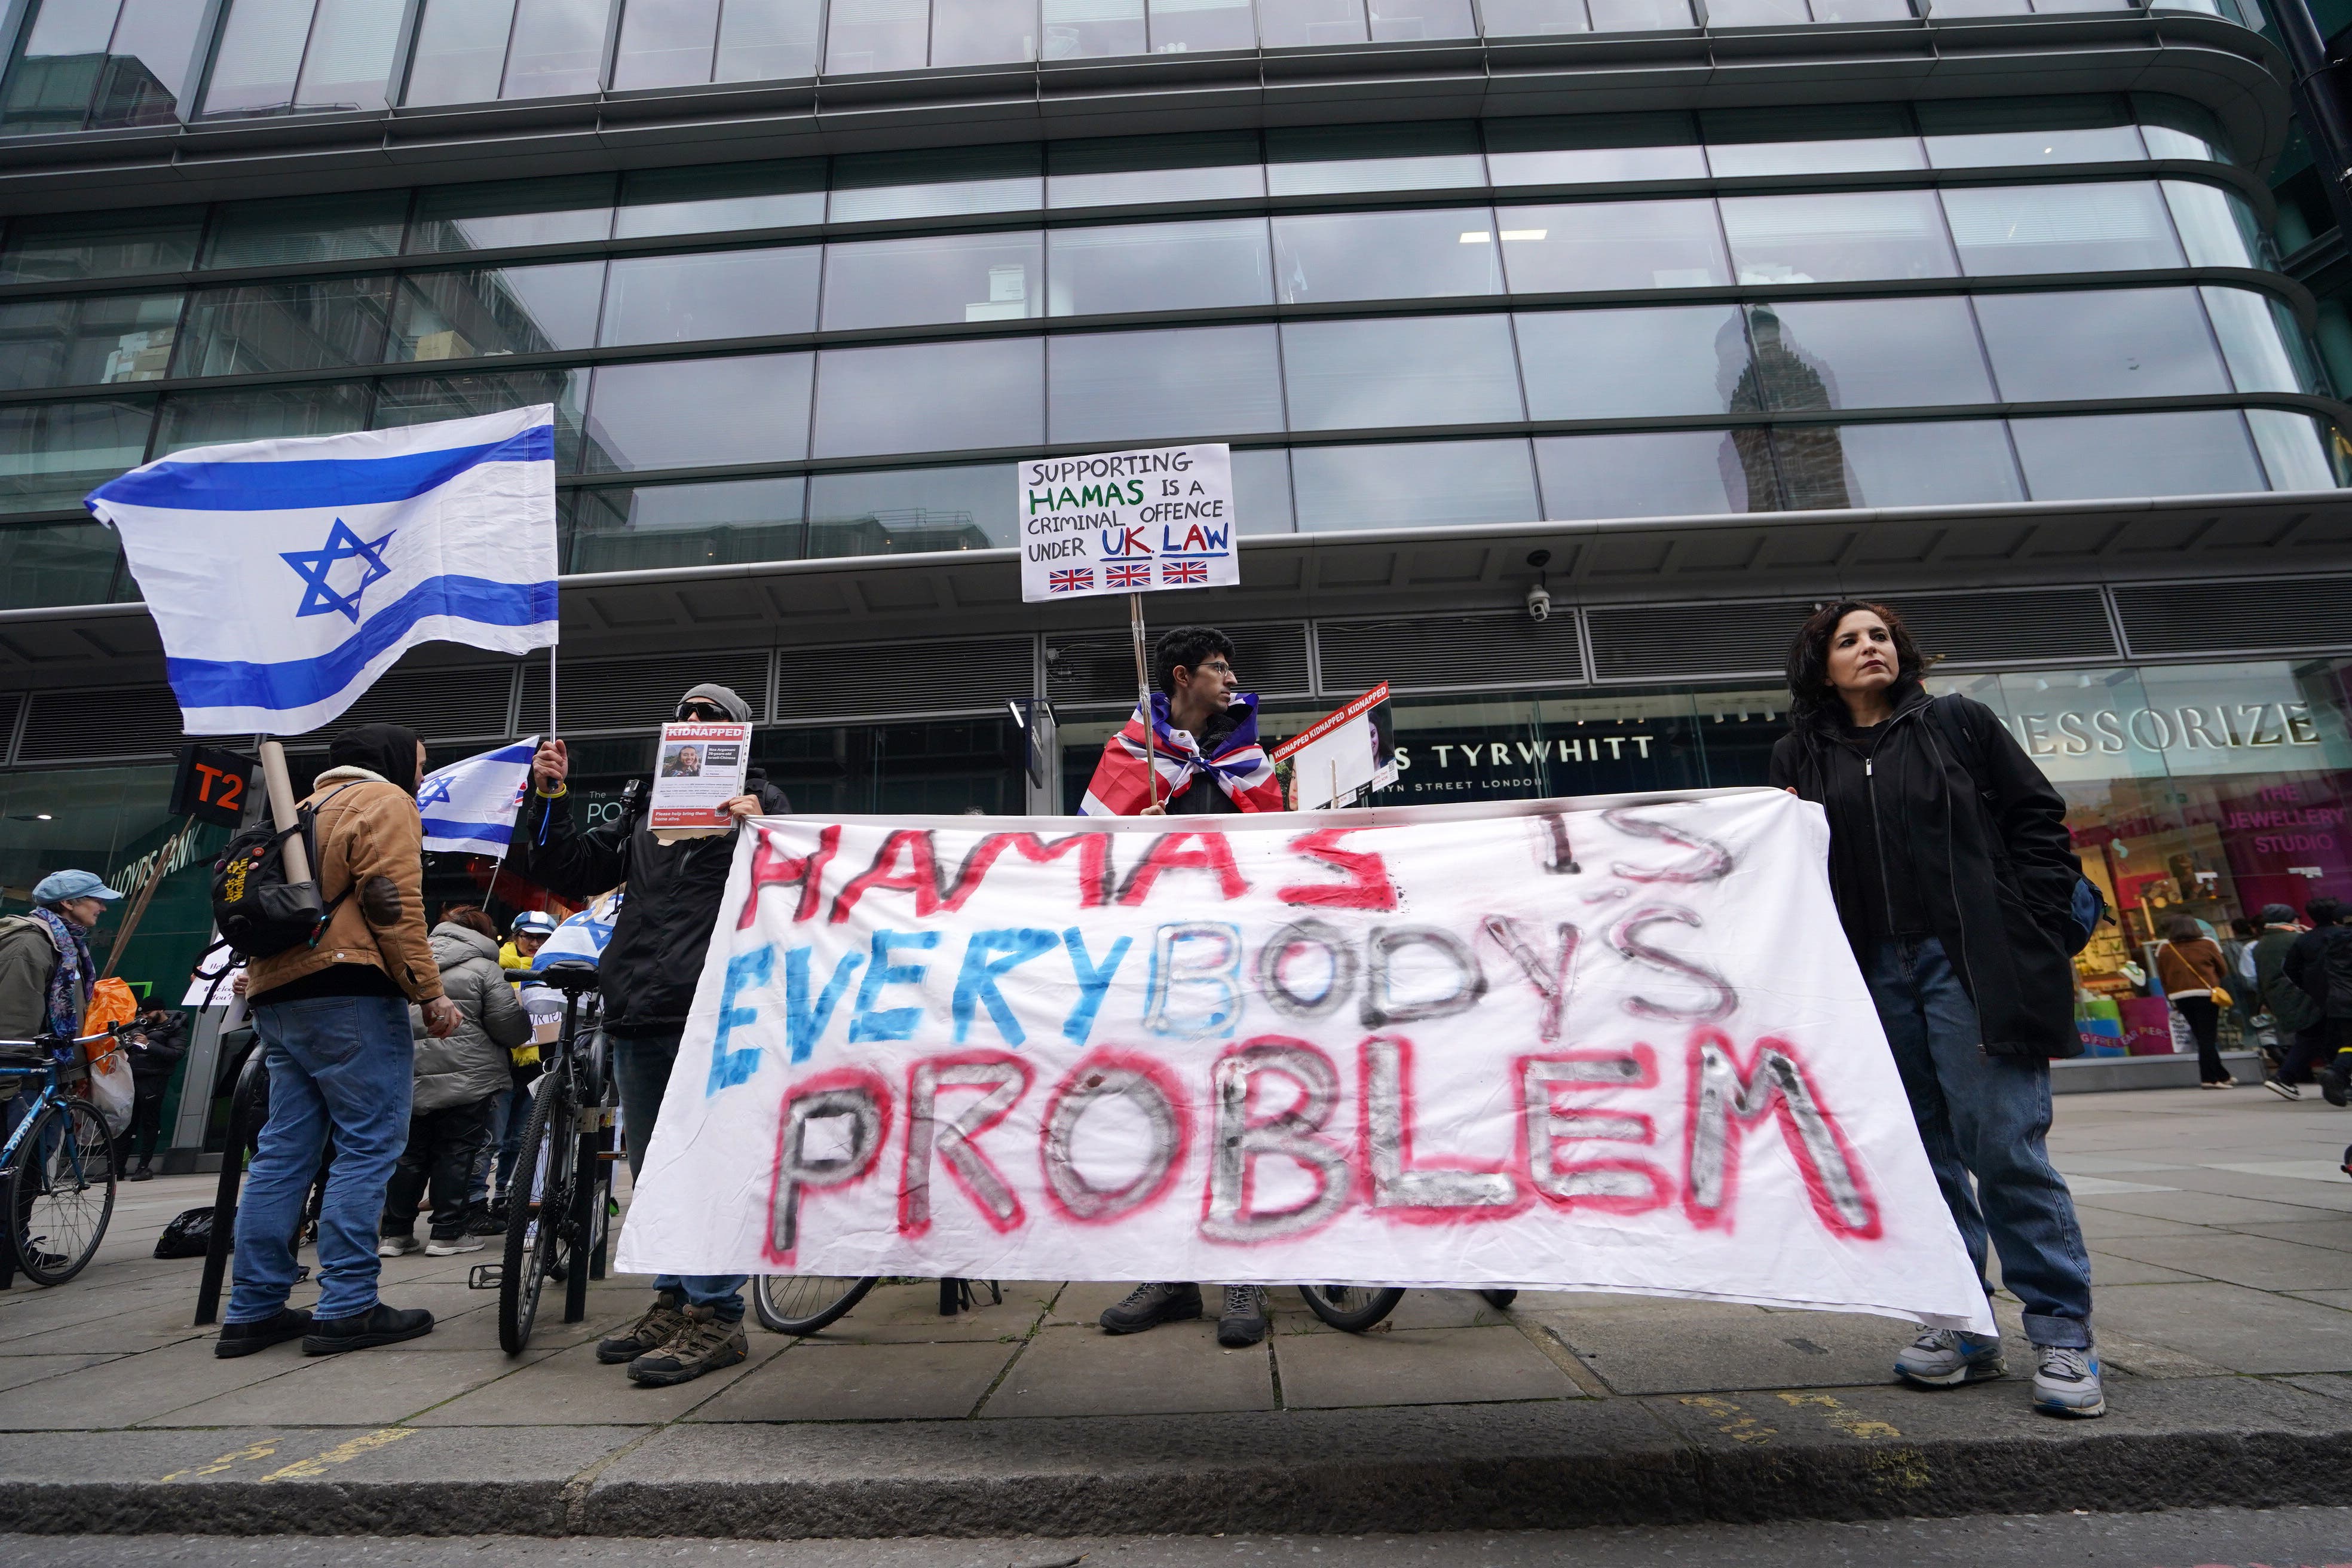 A protest against the weekly pro-Palestine rallies in central London (Jordan Pettitt/PA)